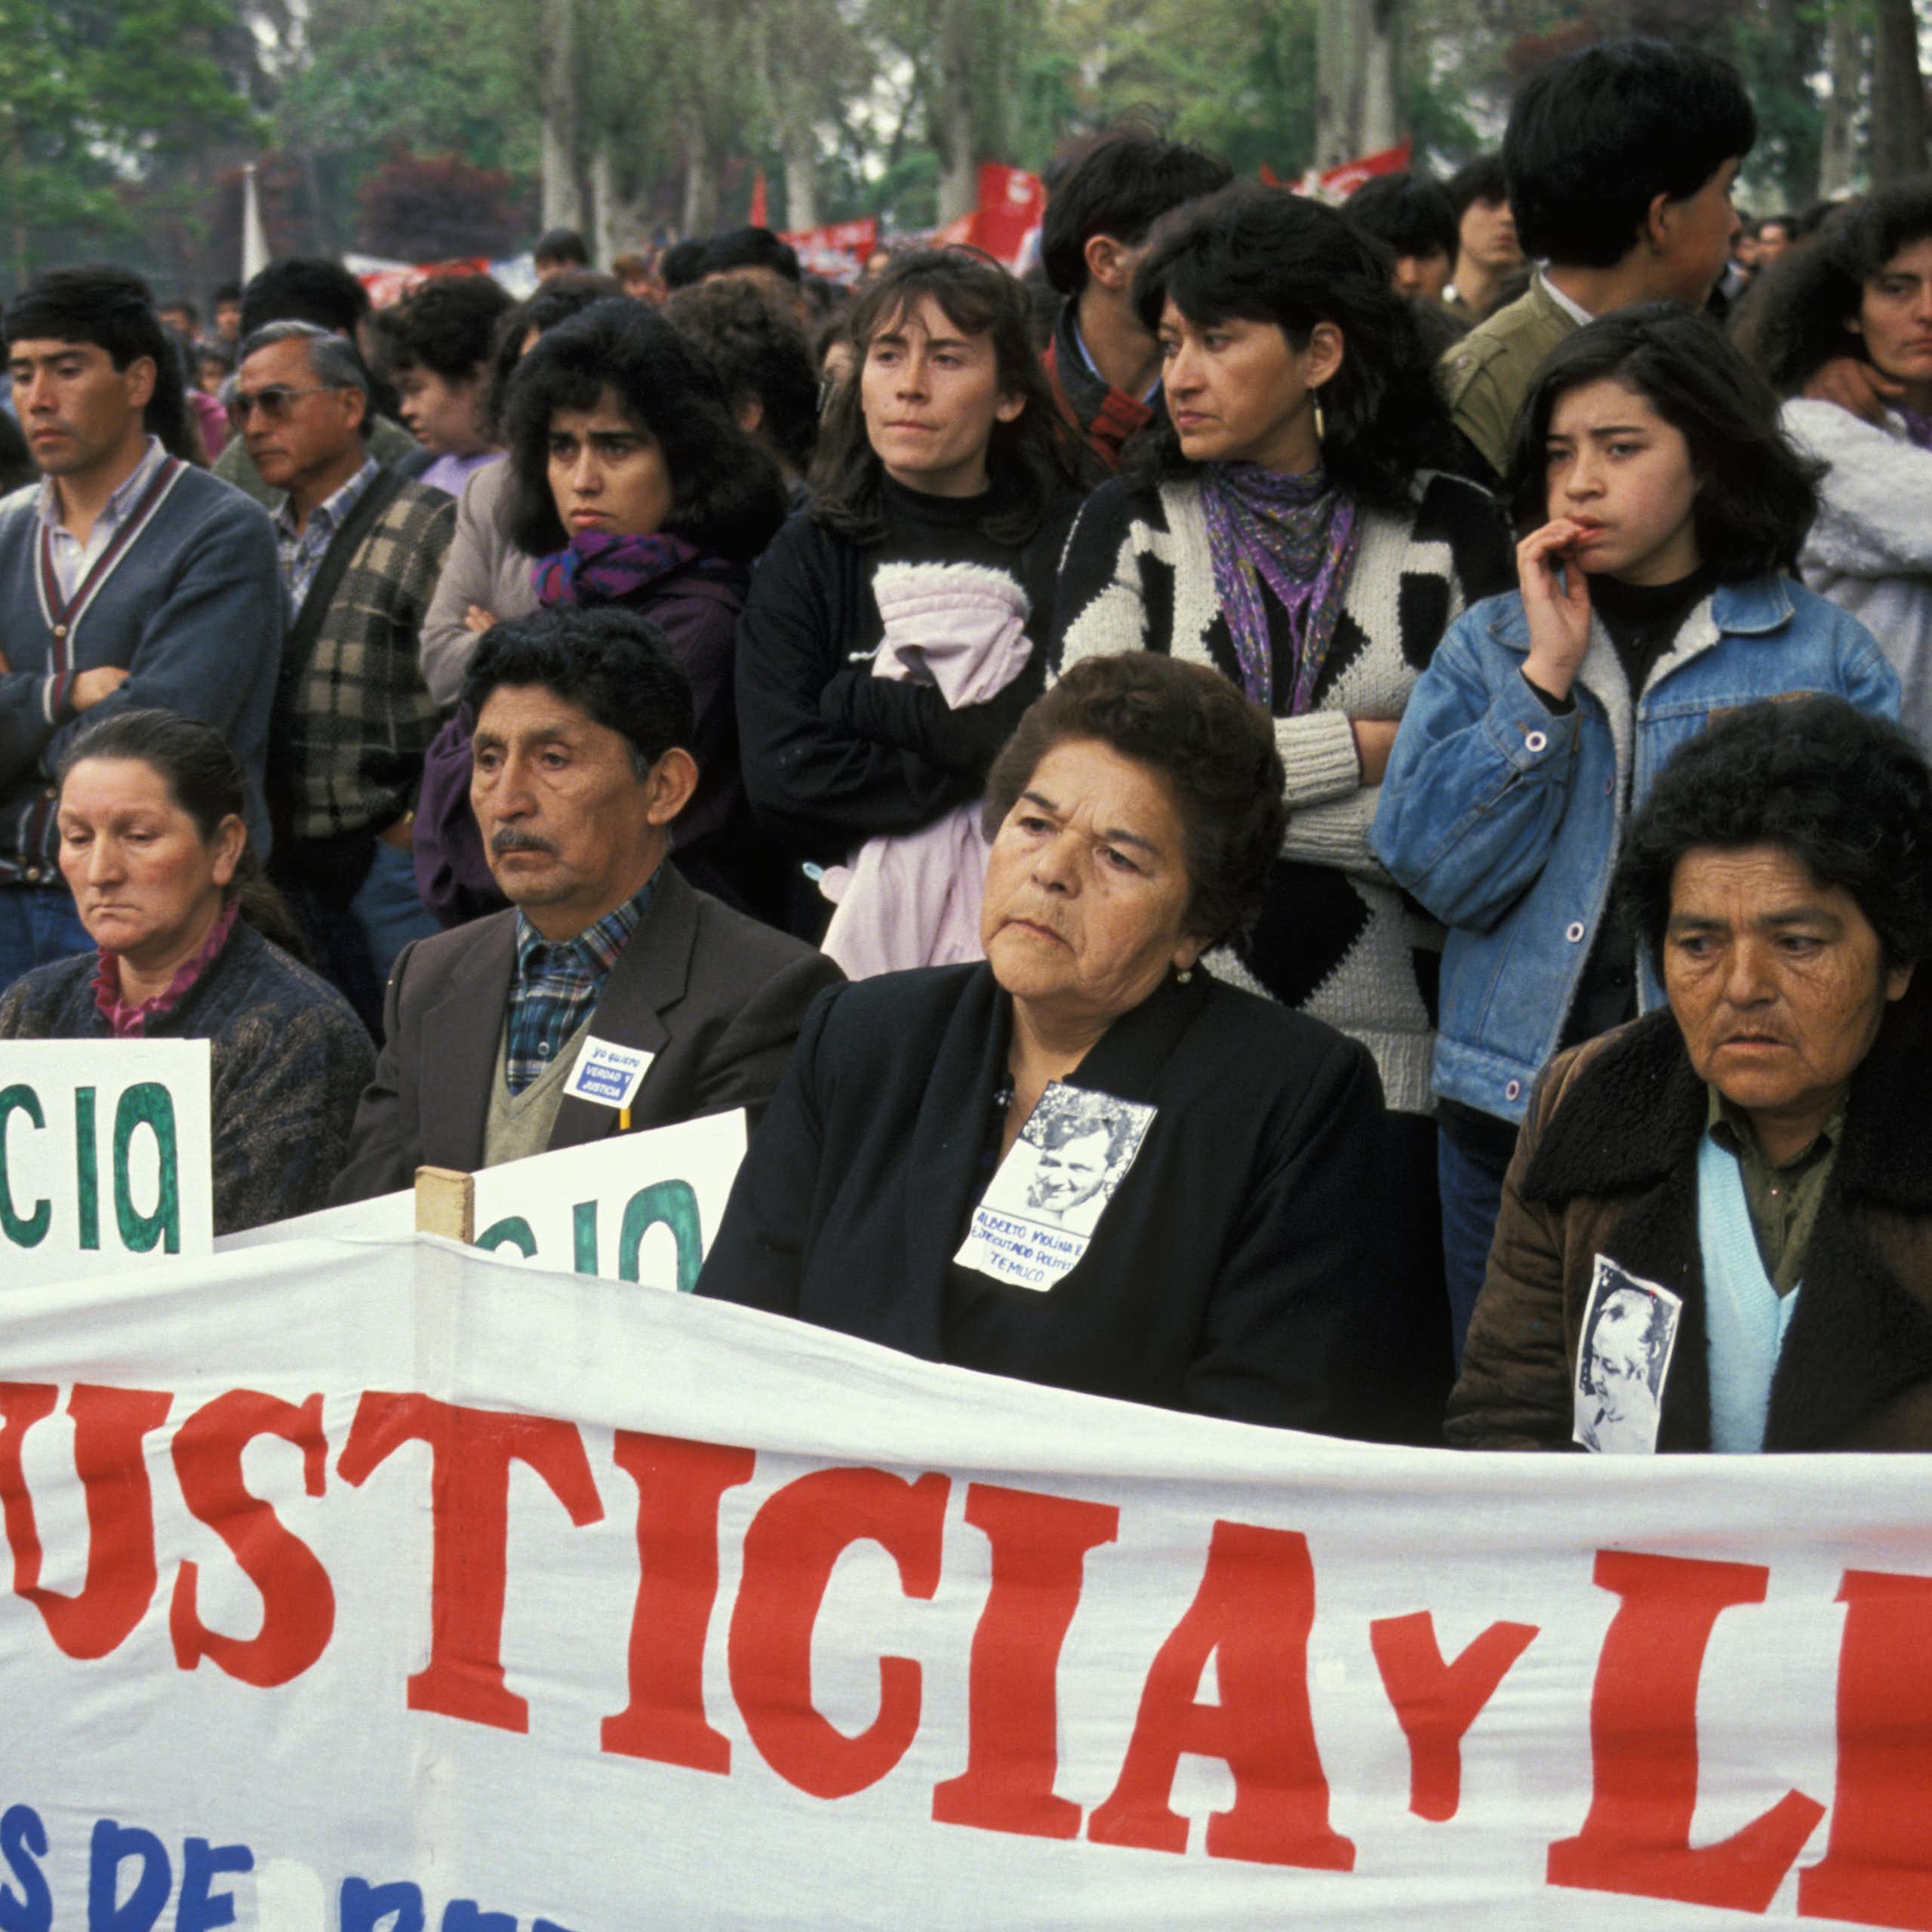 Rows of men, women and children protesting in Santiago, Chile